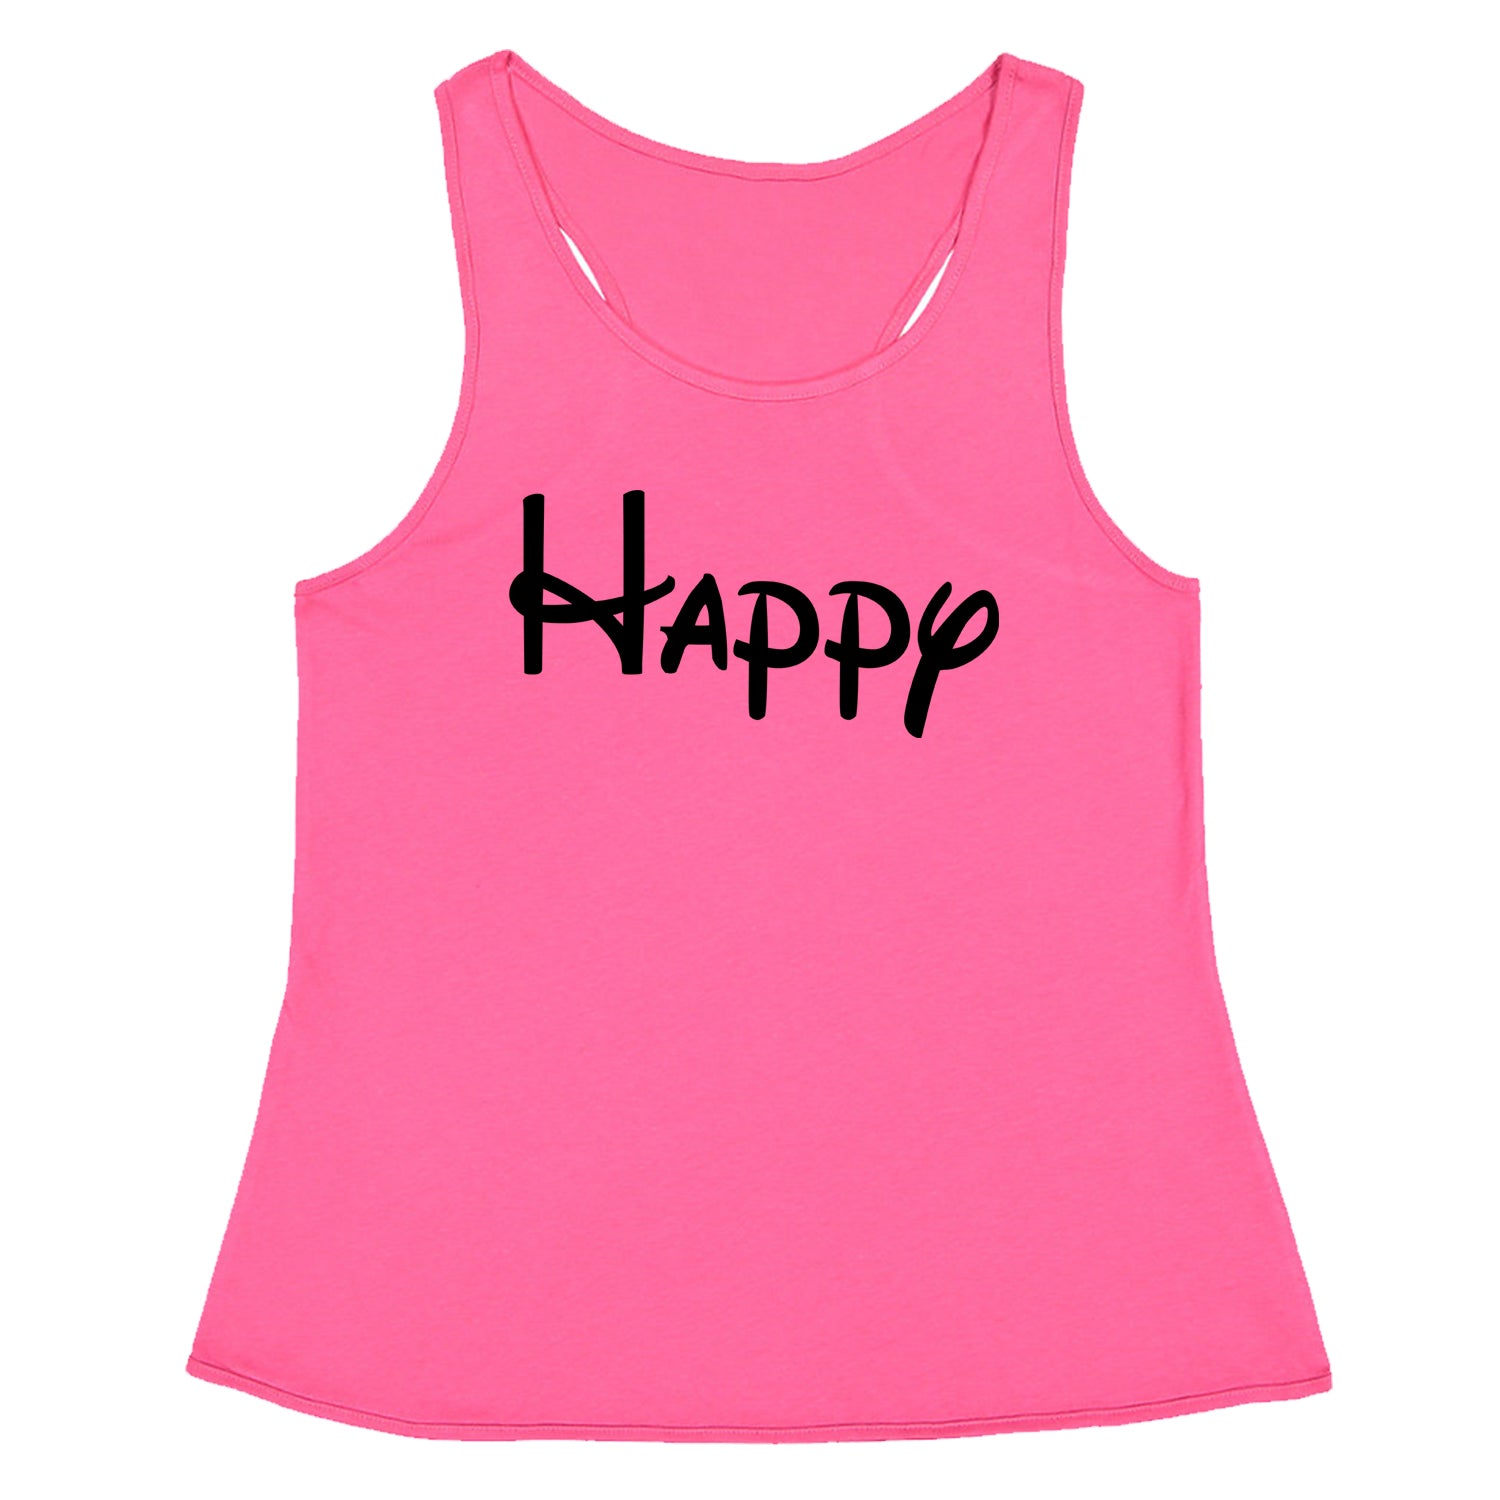 Happy - 7 Dwarfs Costume Racerback Tank Top for Women and, costume, dwarfs, group, halloween, matching, seven, snow, the, white by Expression Tees